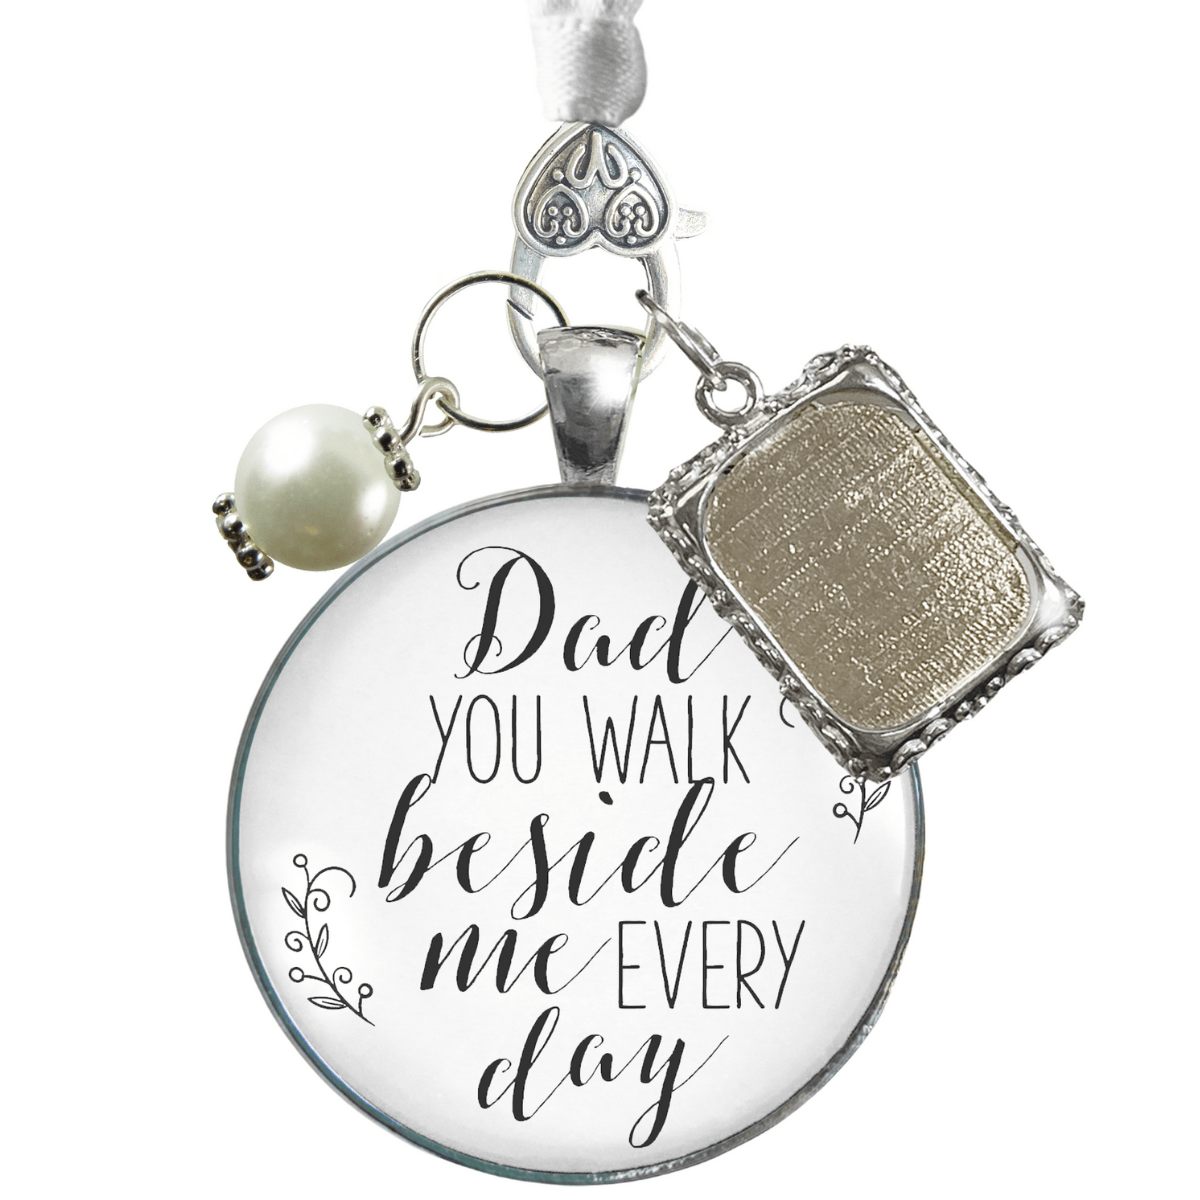 Wedding Bouquet Charm Dad You Walk Beside Me White Bride Father Photo Silver Finish - Gutsy Goodness Handmade Jewelry Gifts